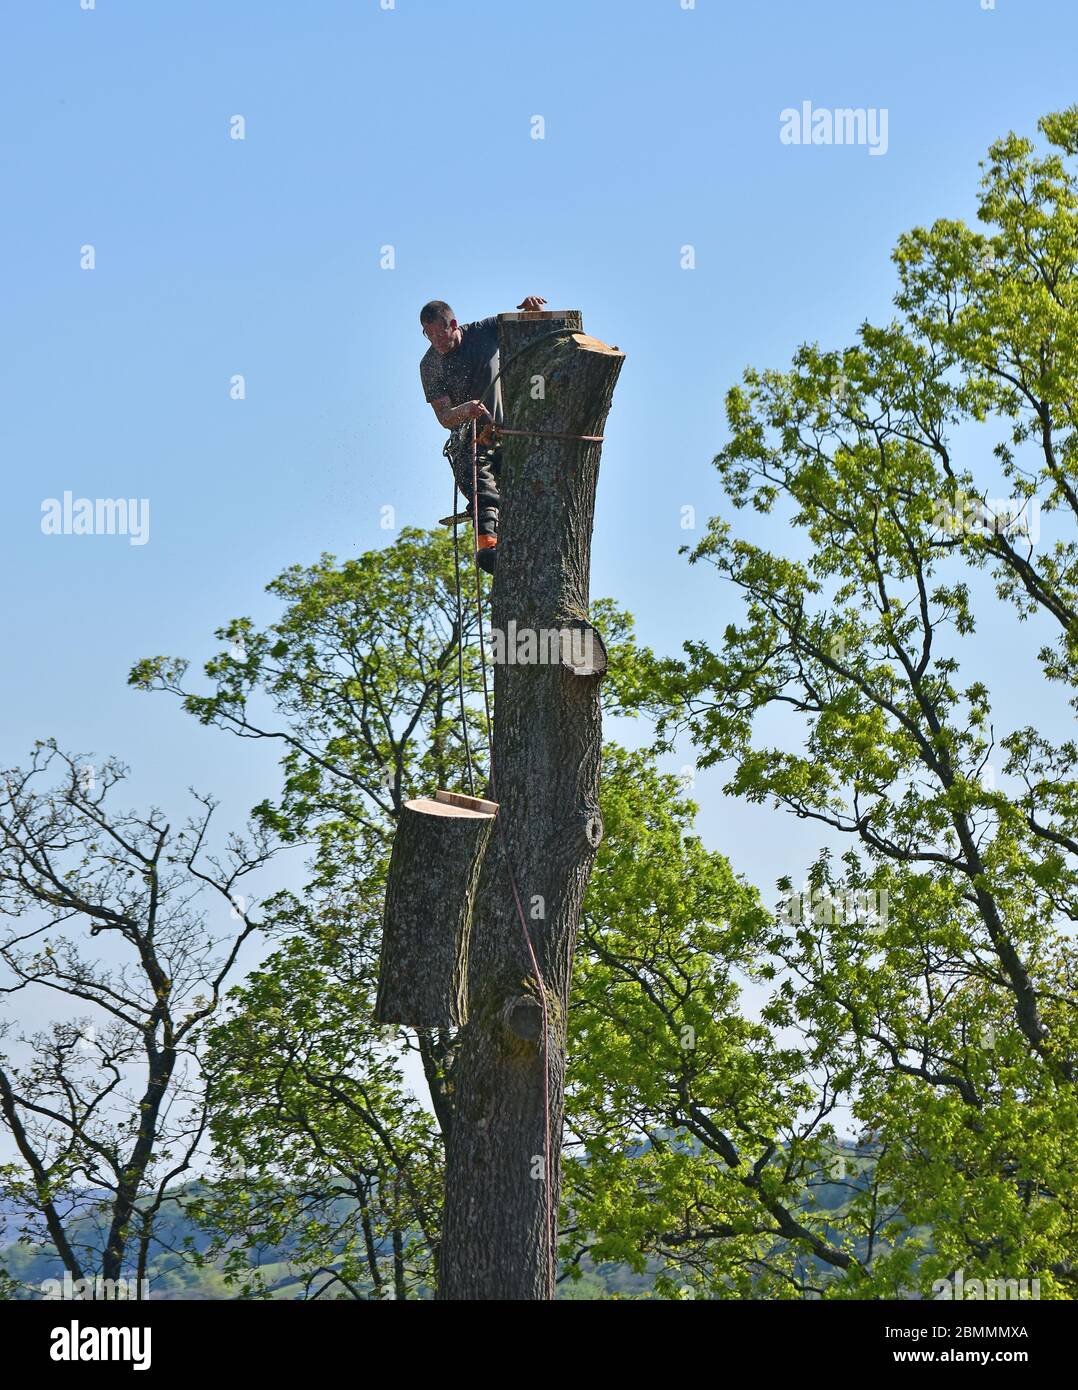 Tree surgeon cutting down a tree using a chain saw in Yorkshire, using climbing gear. Stock Photo